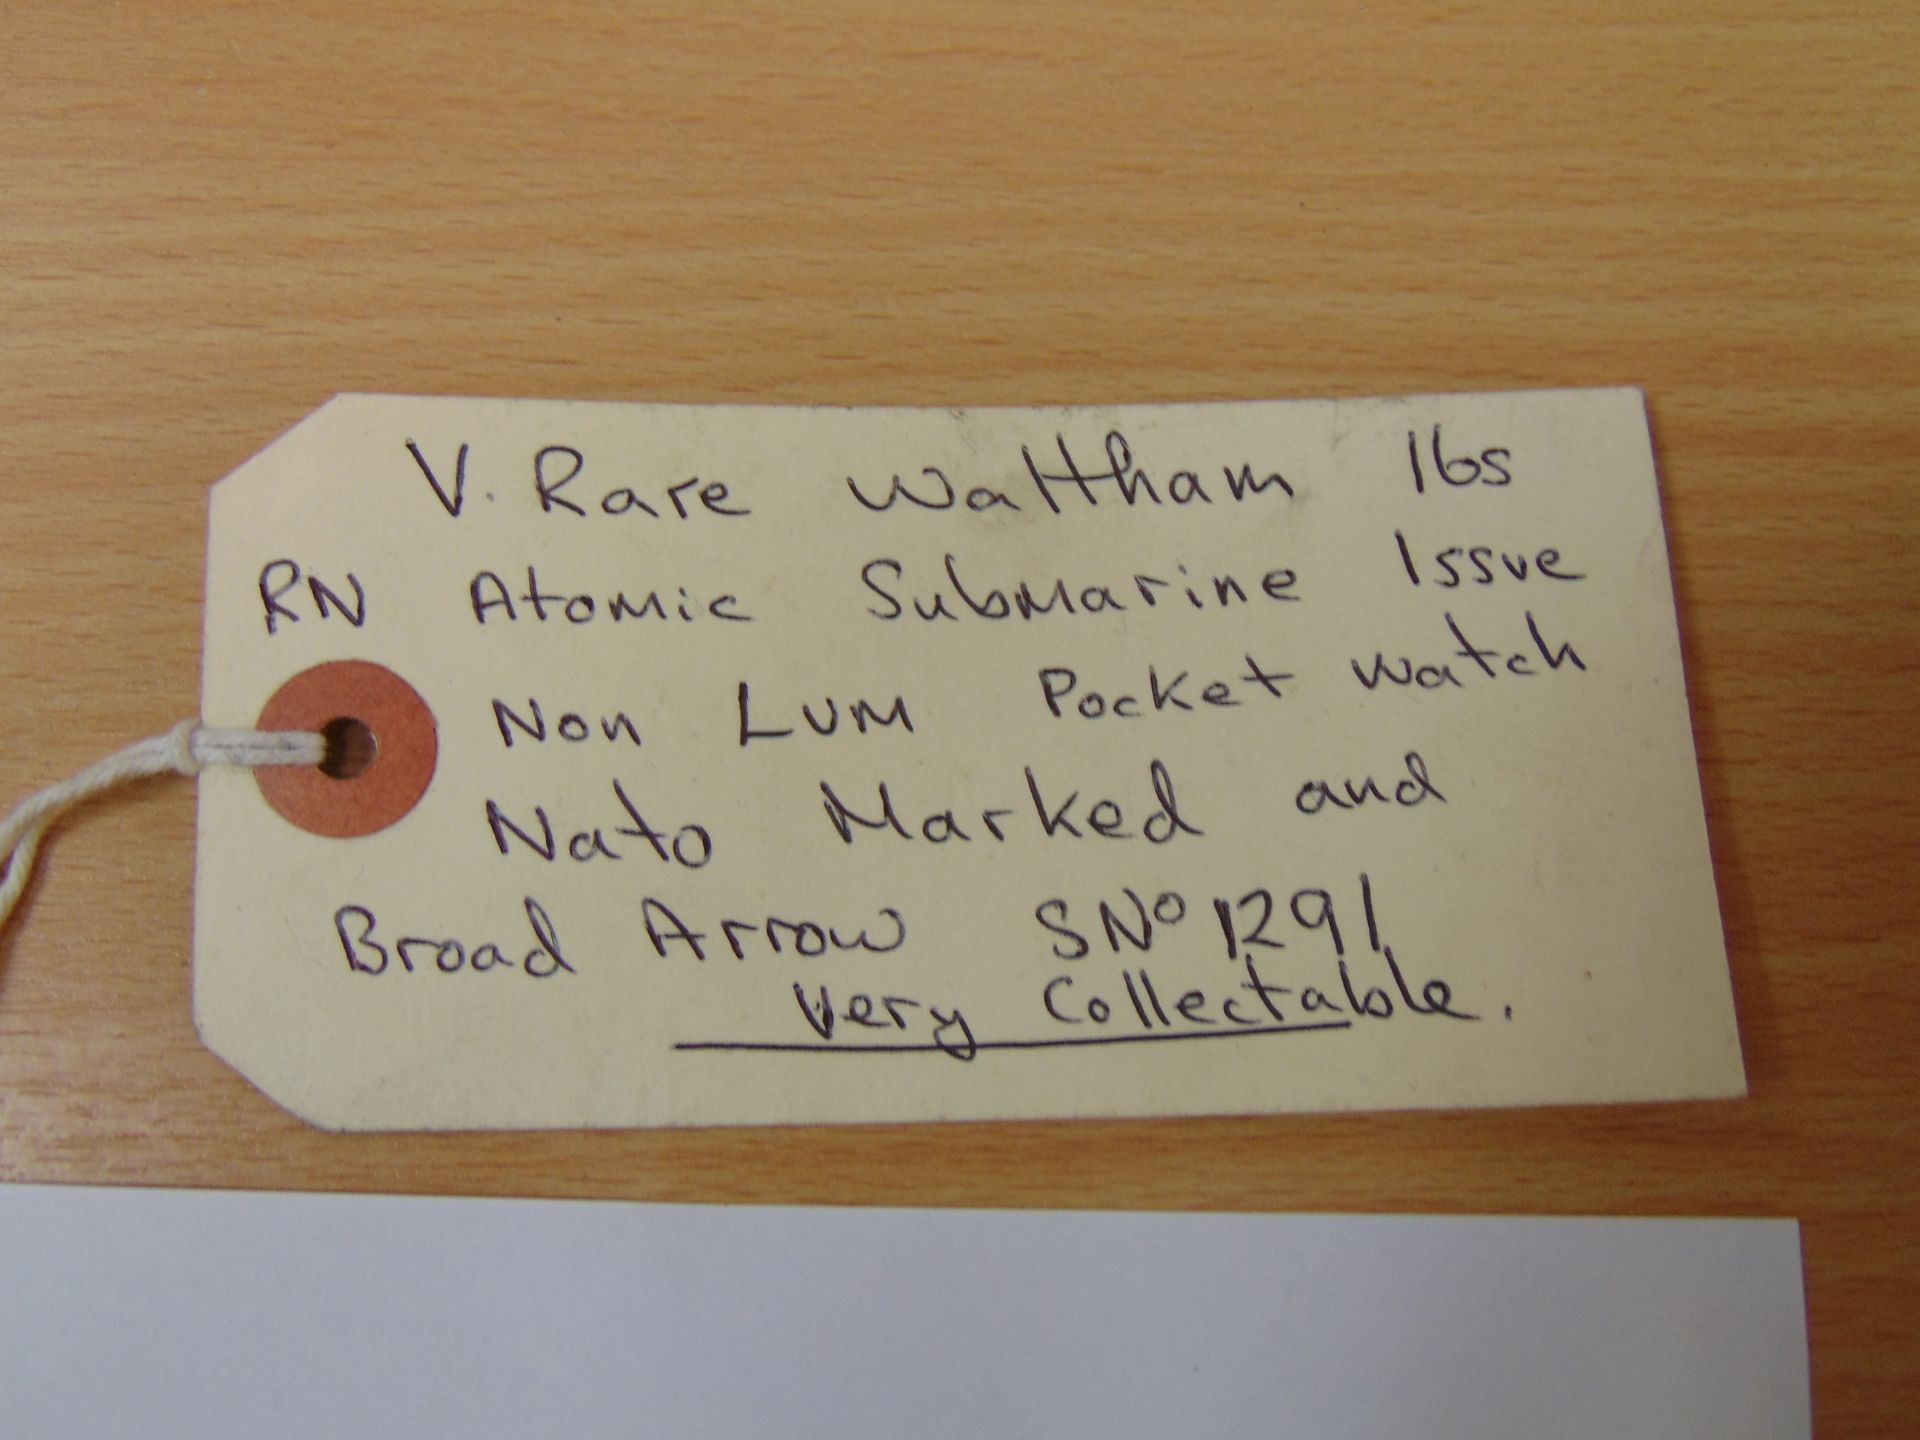 V.Rare Waltham 16s RN Atomic Submarine issue non LUM pocket watch Nato Marked and Broad Arrow - Image 3 of 3